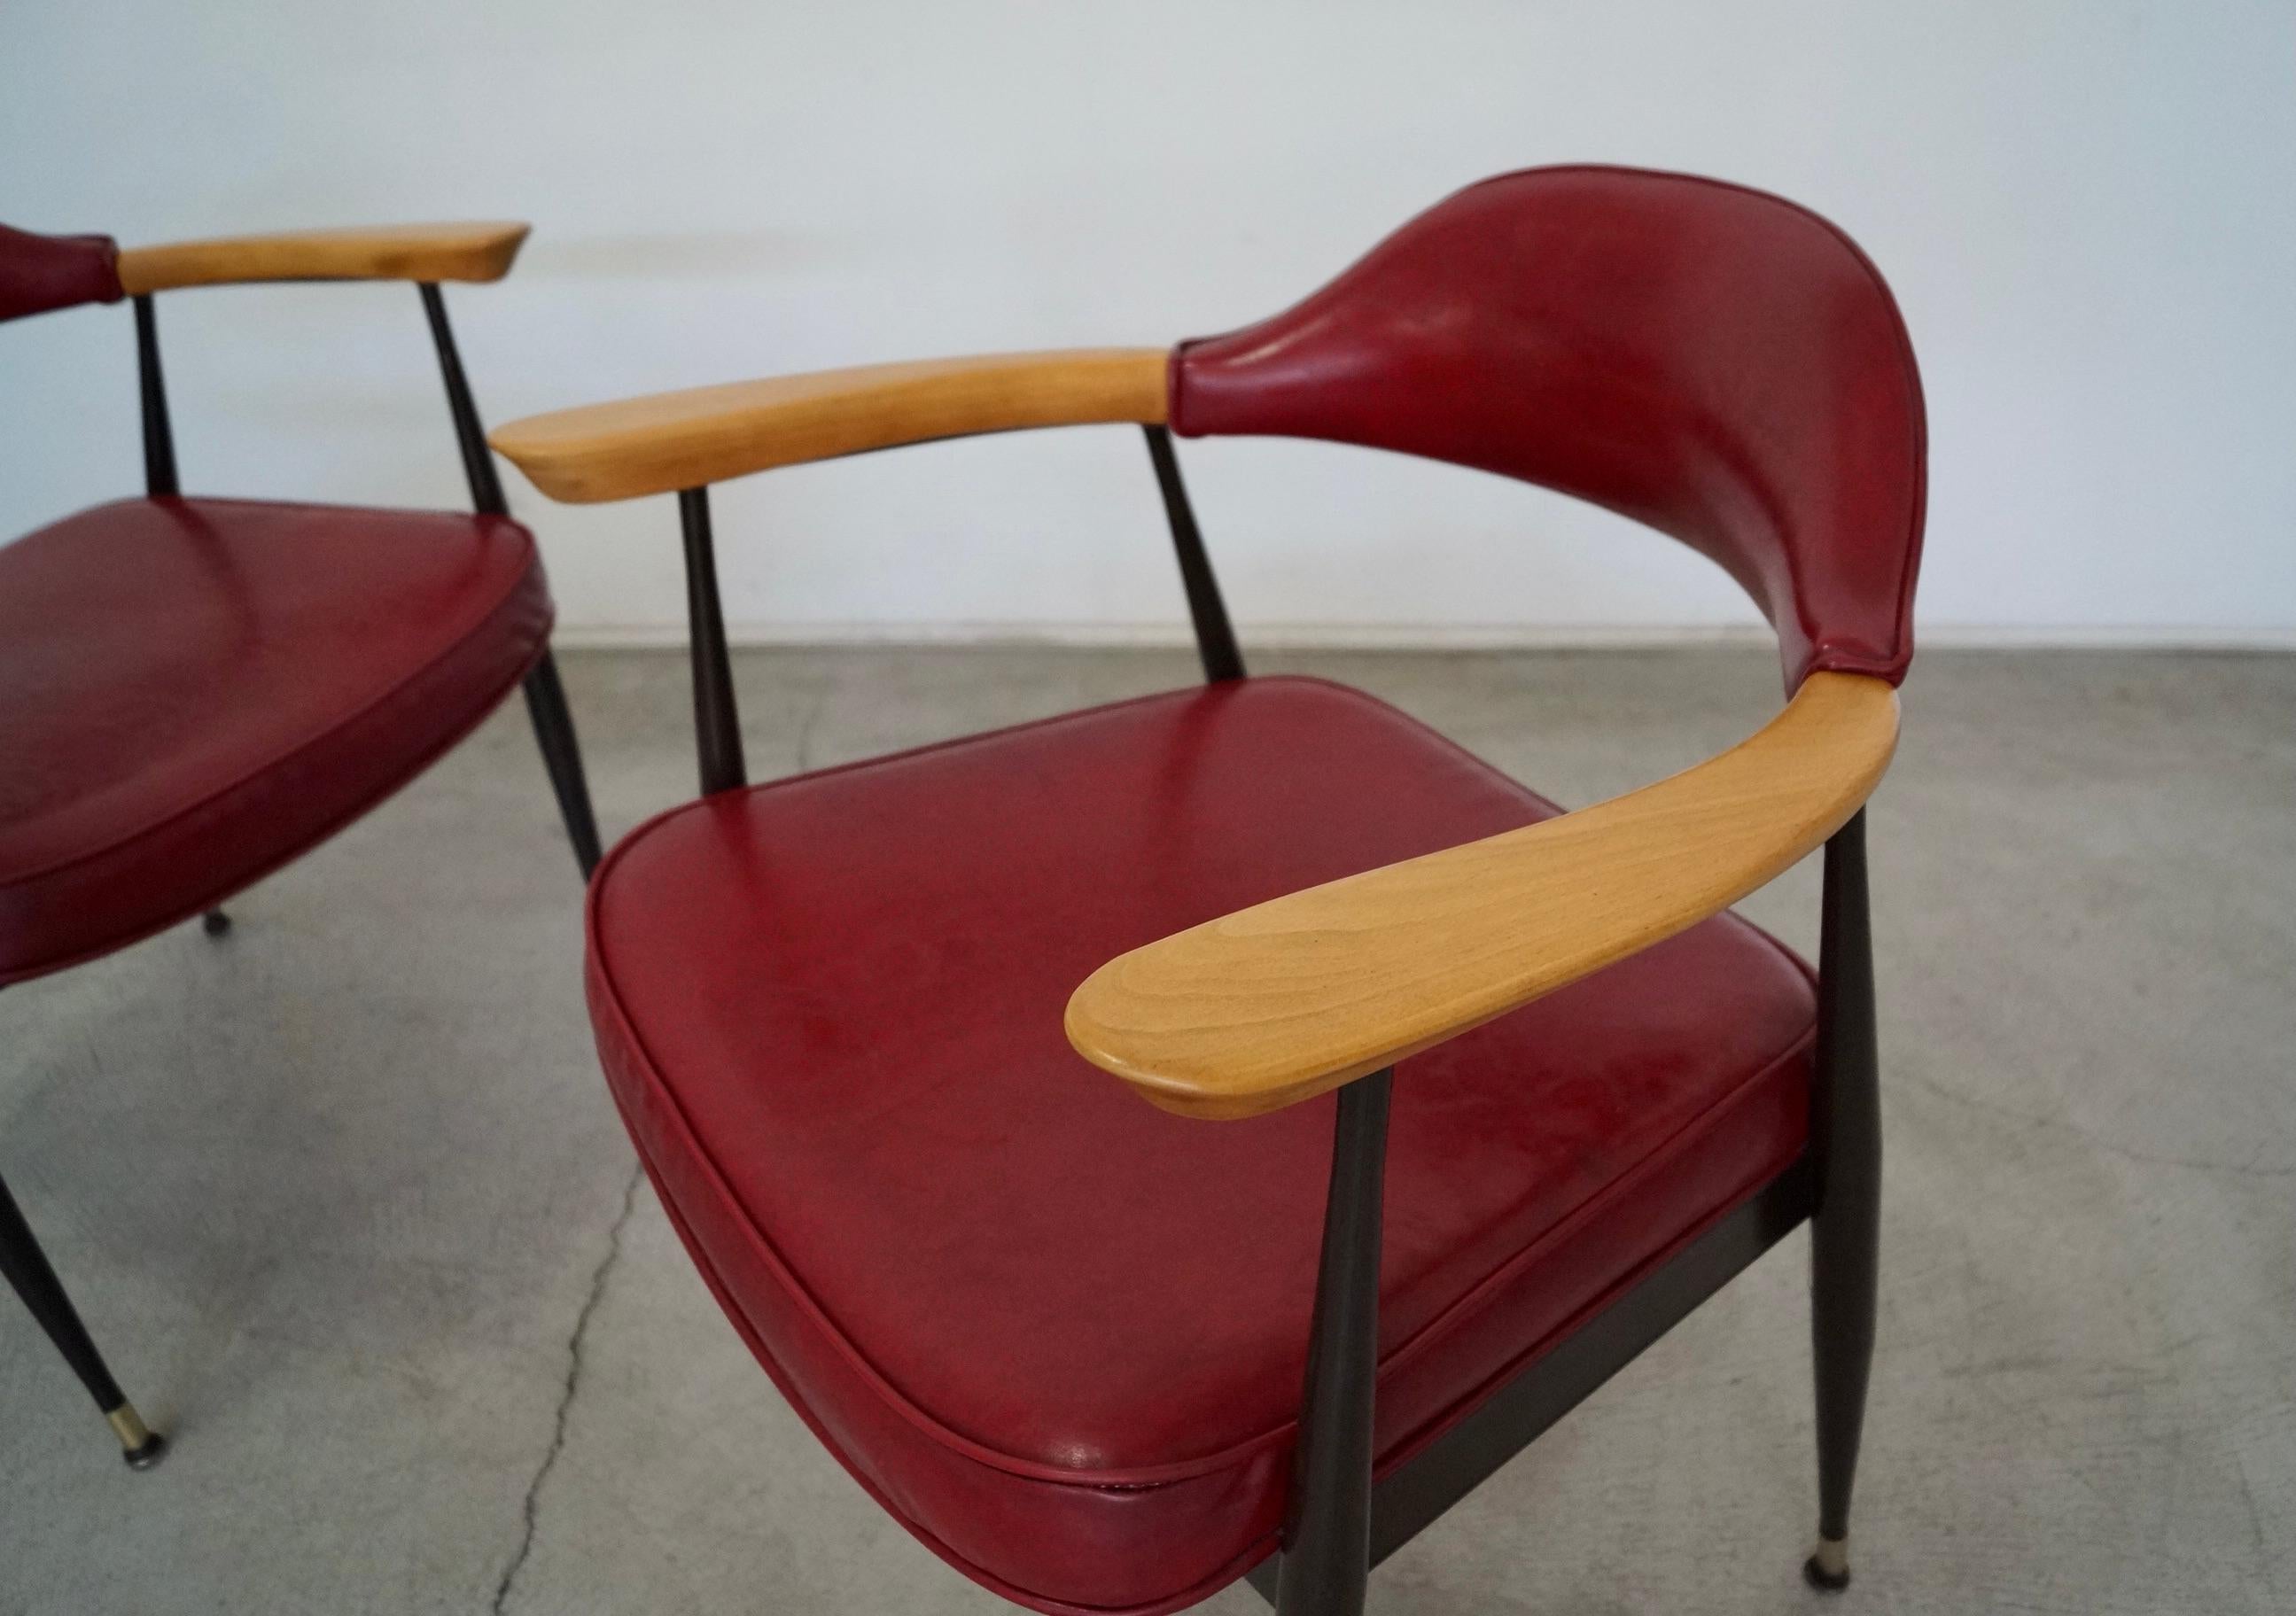 1970's Mid-Century Modern Metal & Wood Armchairs - a Pair For Sale 4